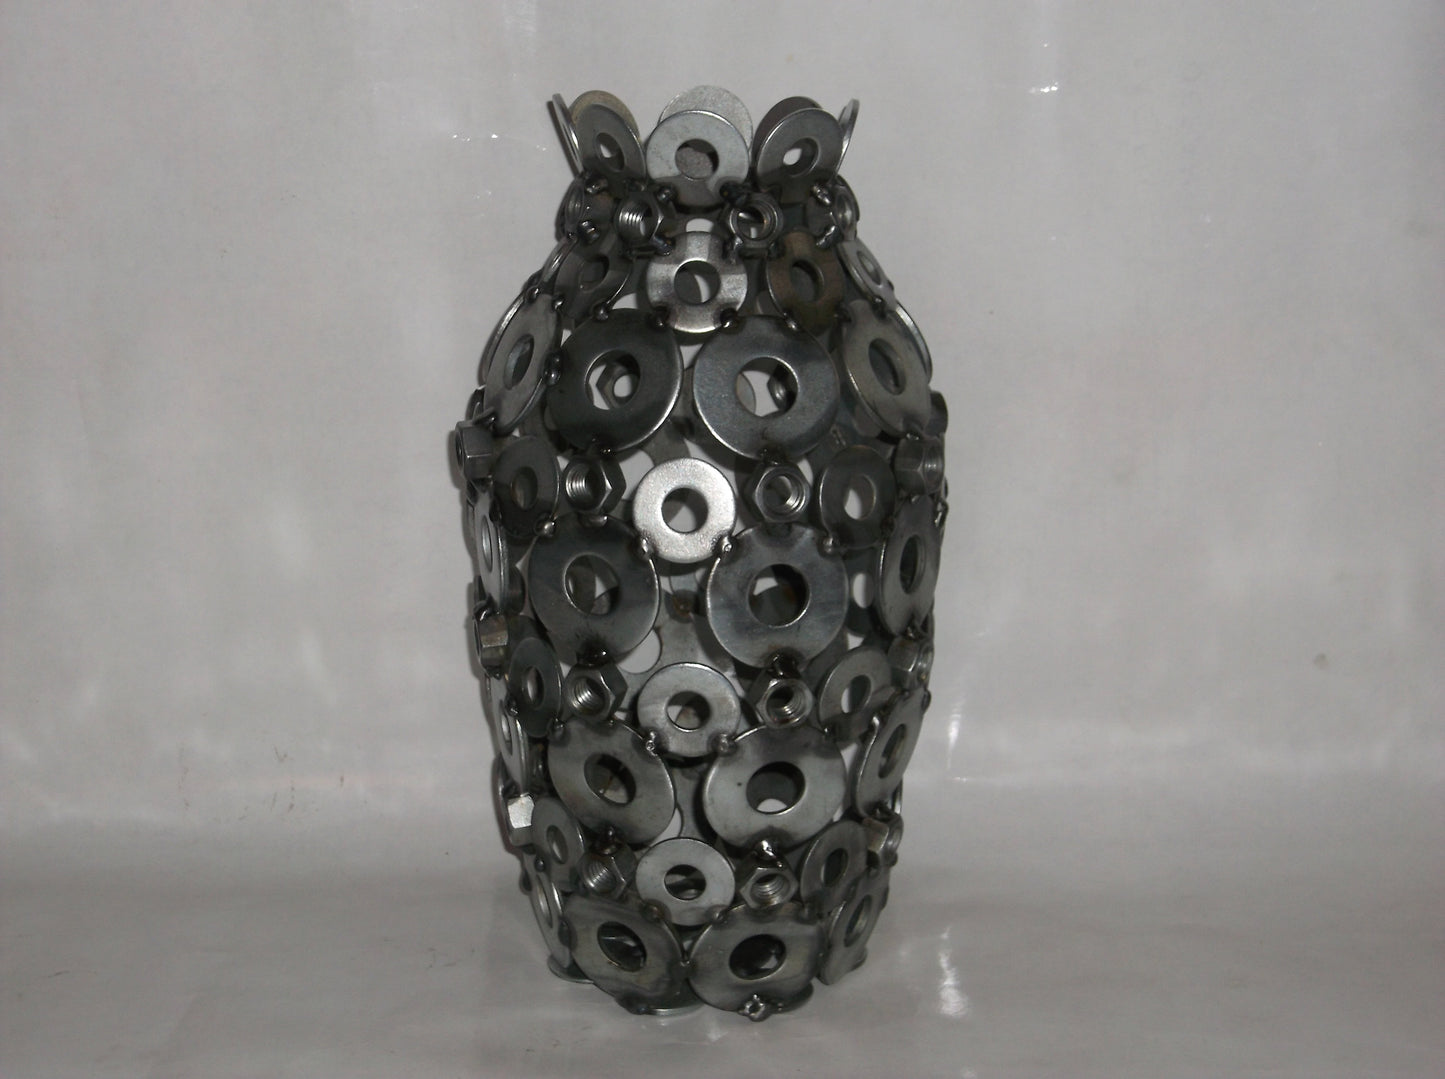 Metal Vase Home Decor, Recycled, Up Cycled,  Welded Metal Sculpture and Art